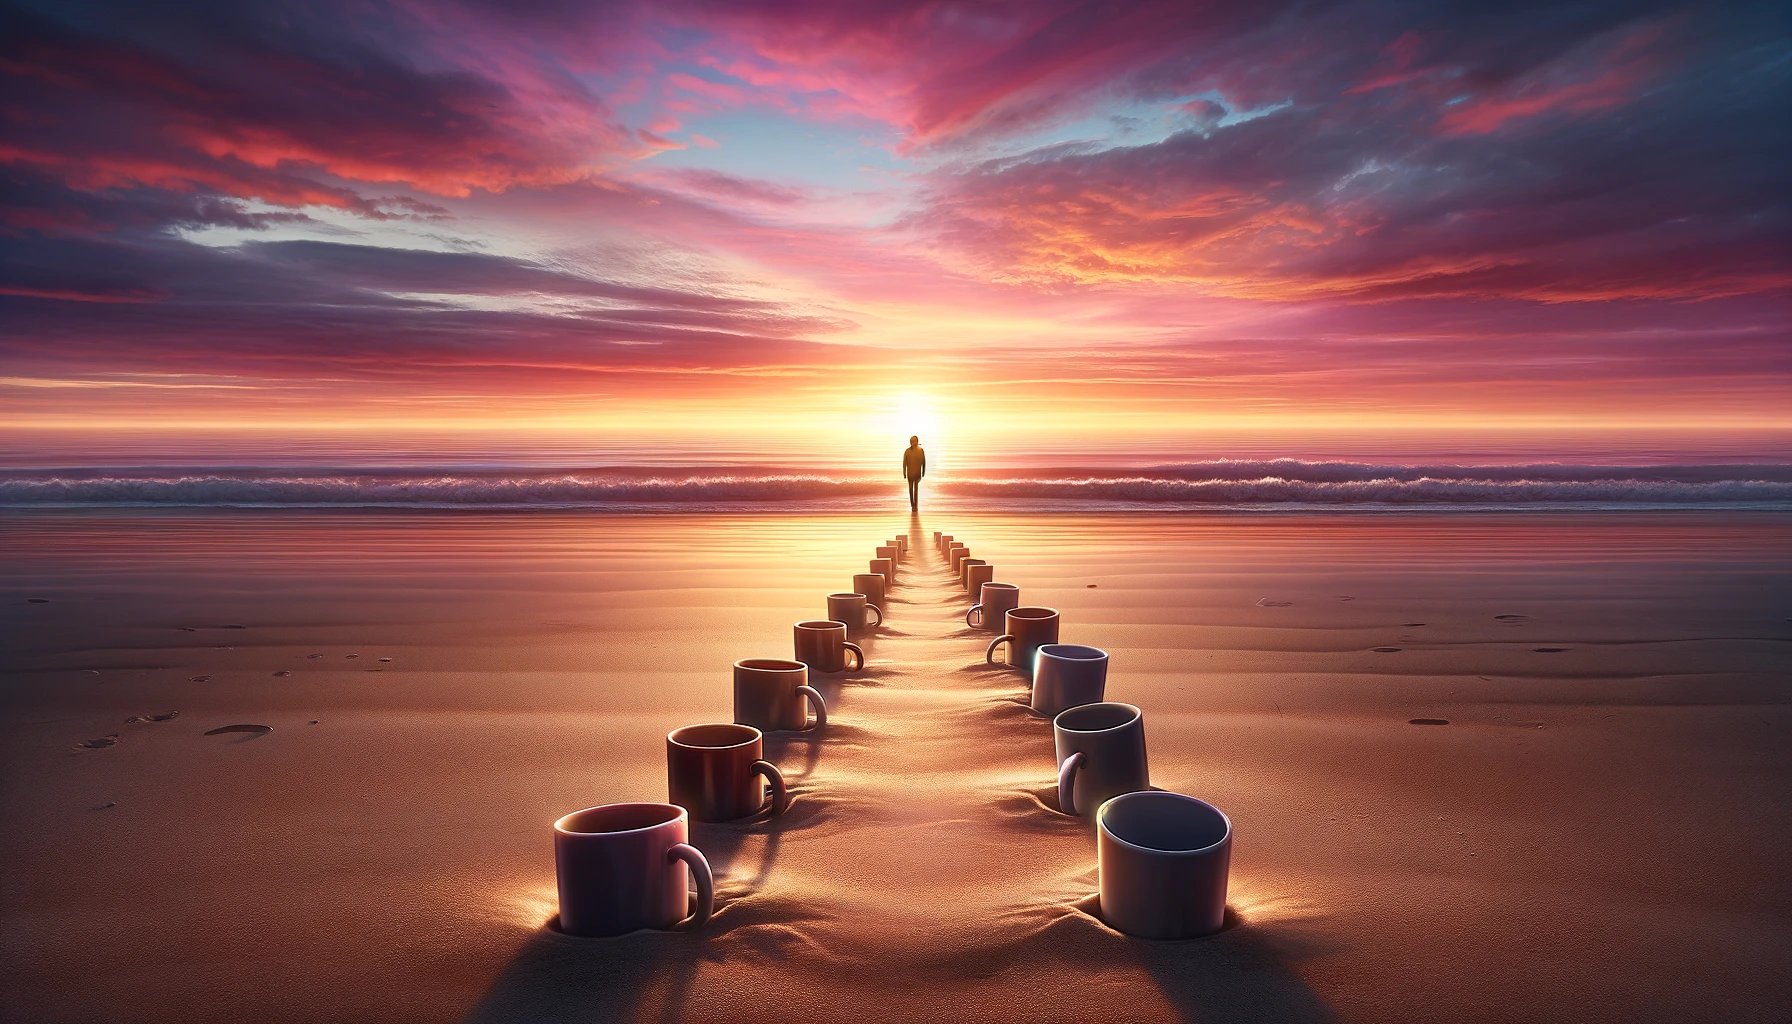 An image depicting a deserted beach at sunset with a person walking away from a row of eight cups half buried in the sand. The scene captures the bit